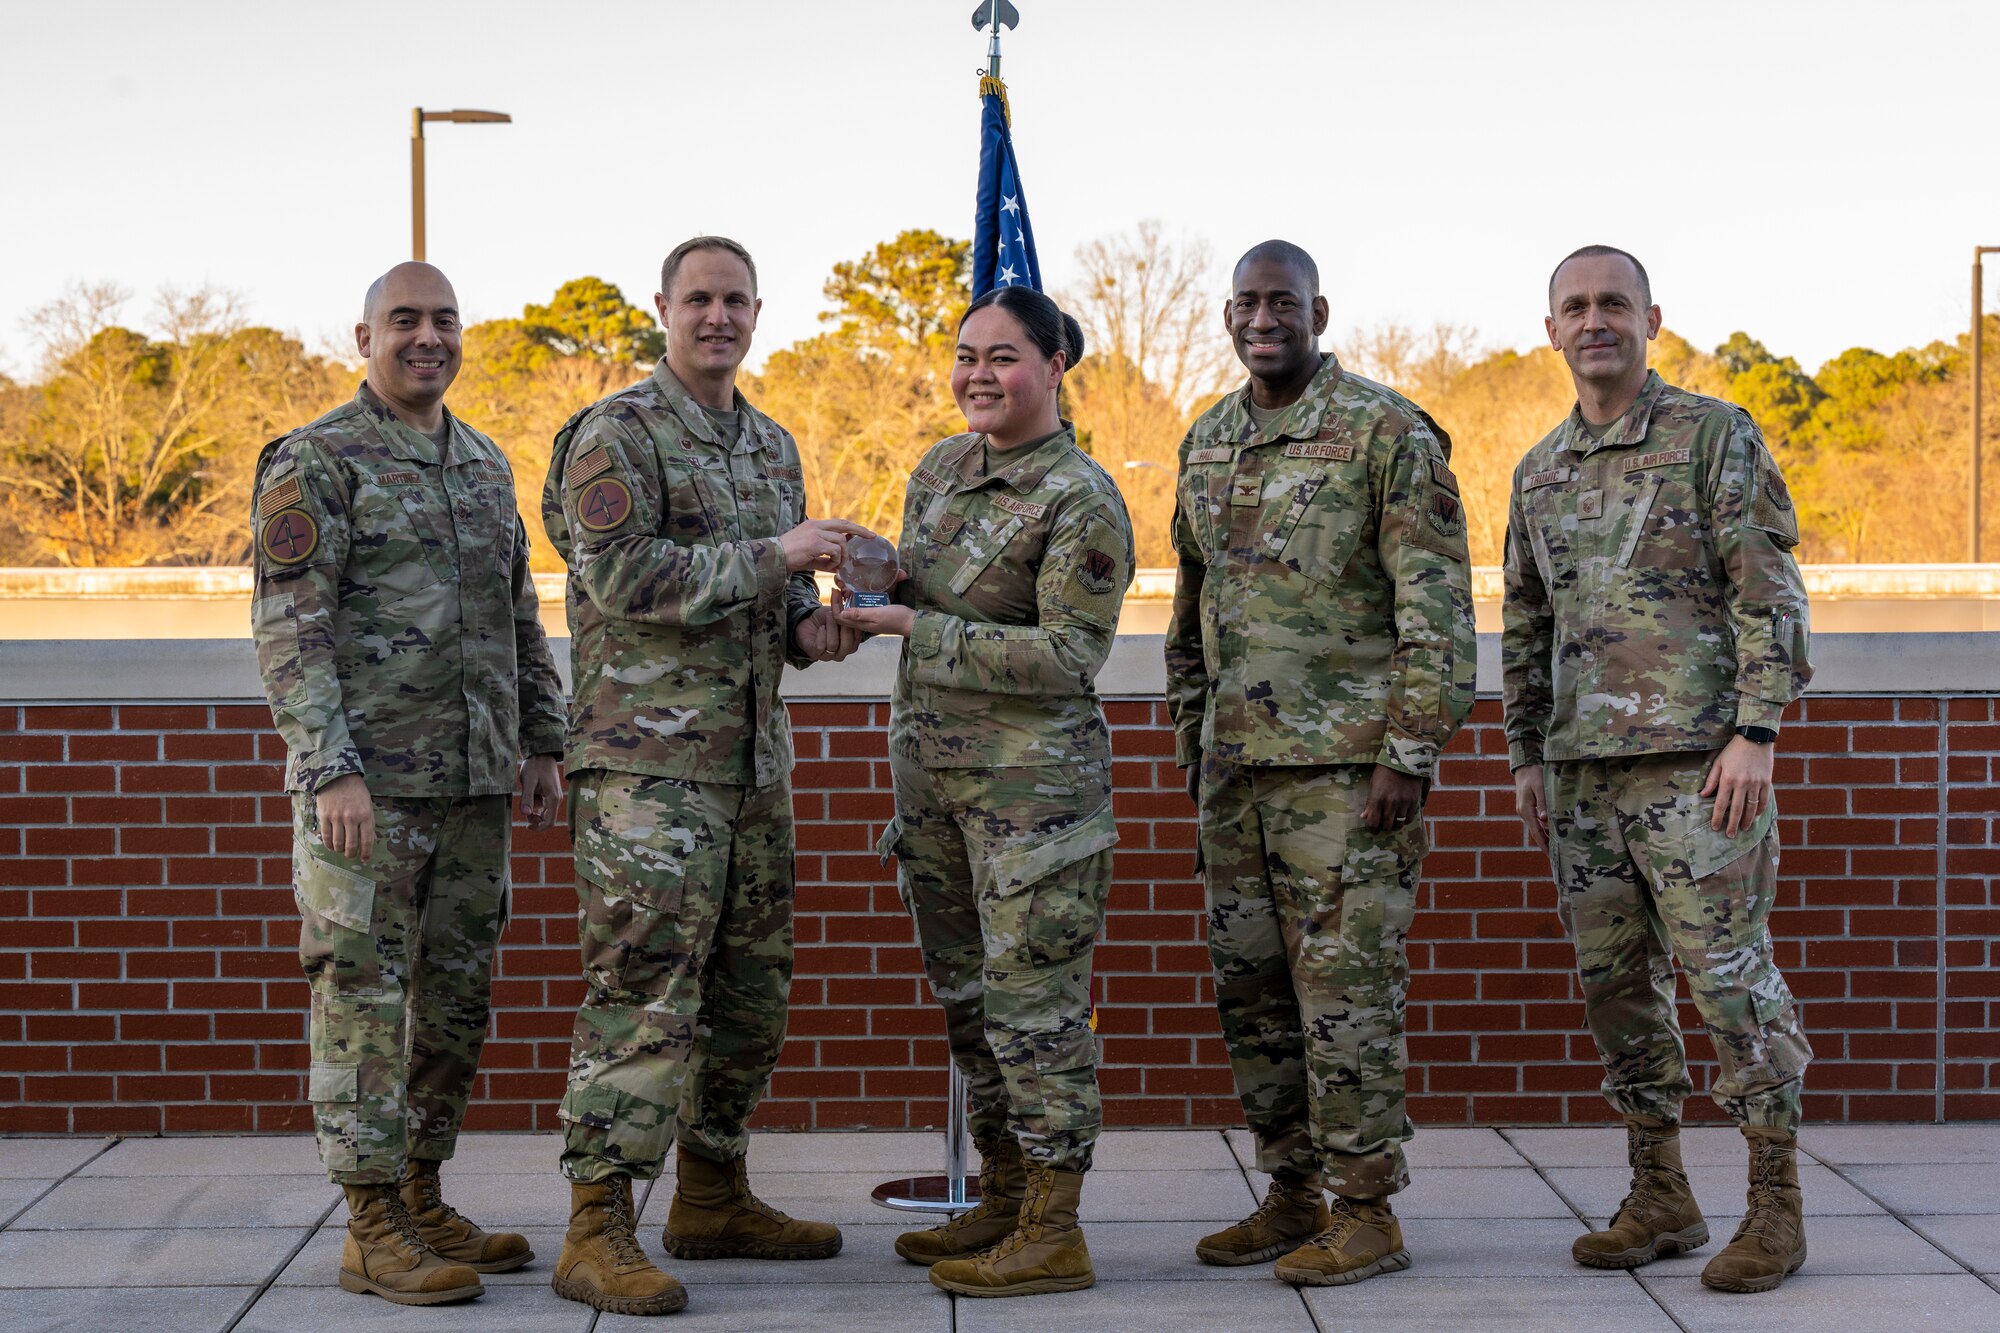 Maratita was awarded the Air Force Medical Service Award for Air Combat Command’s 2022 Laboratory Airman of the Year.